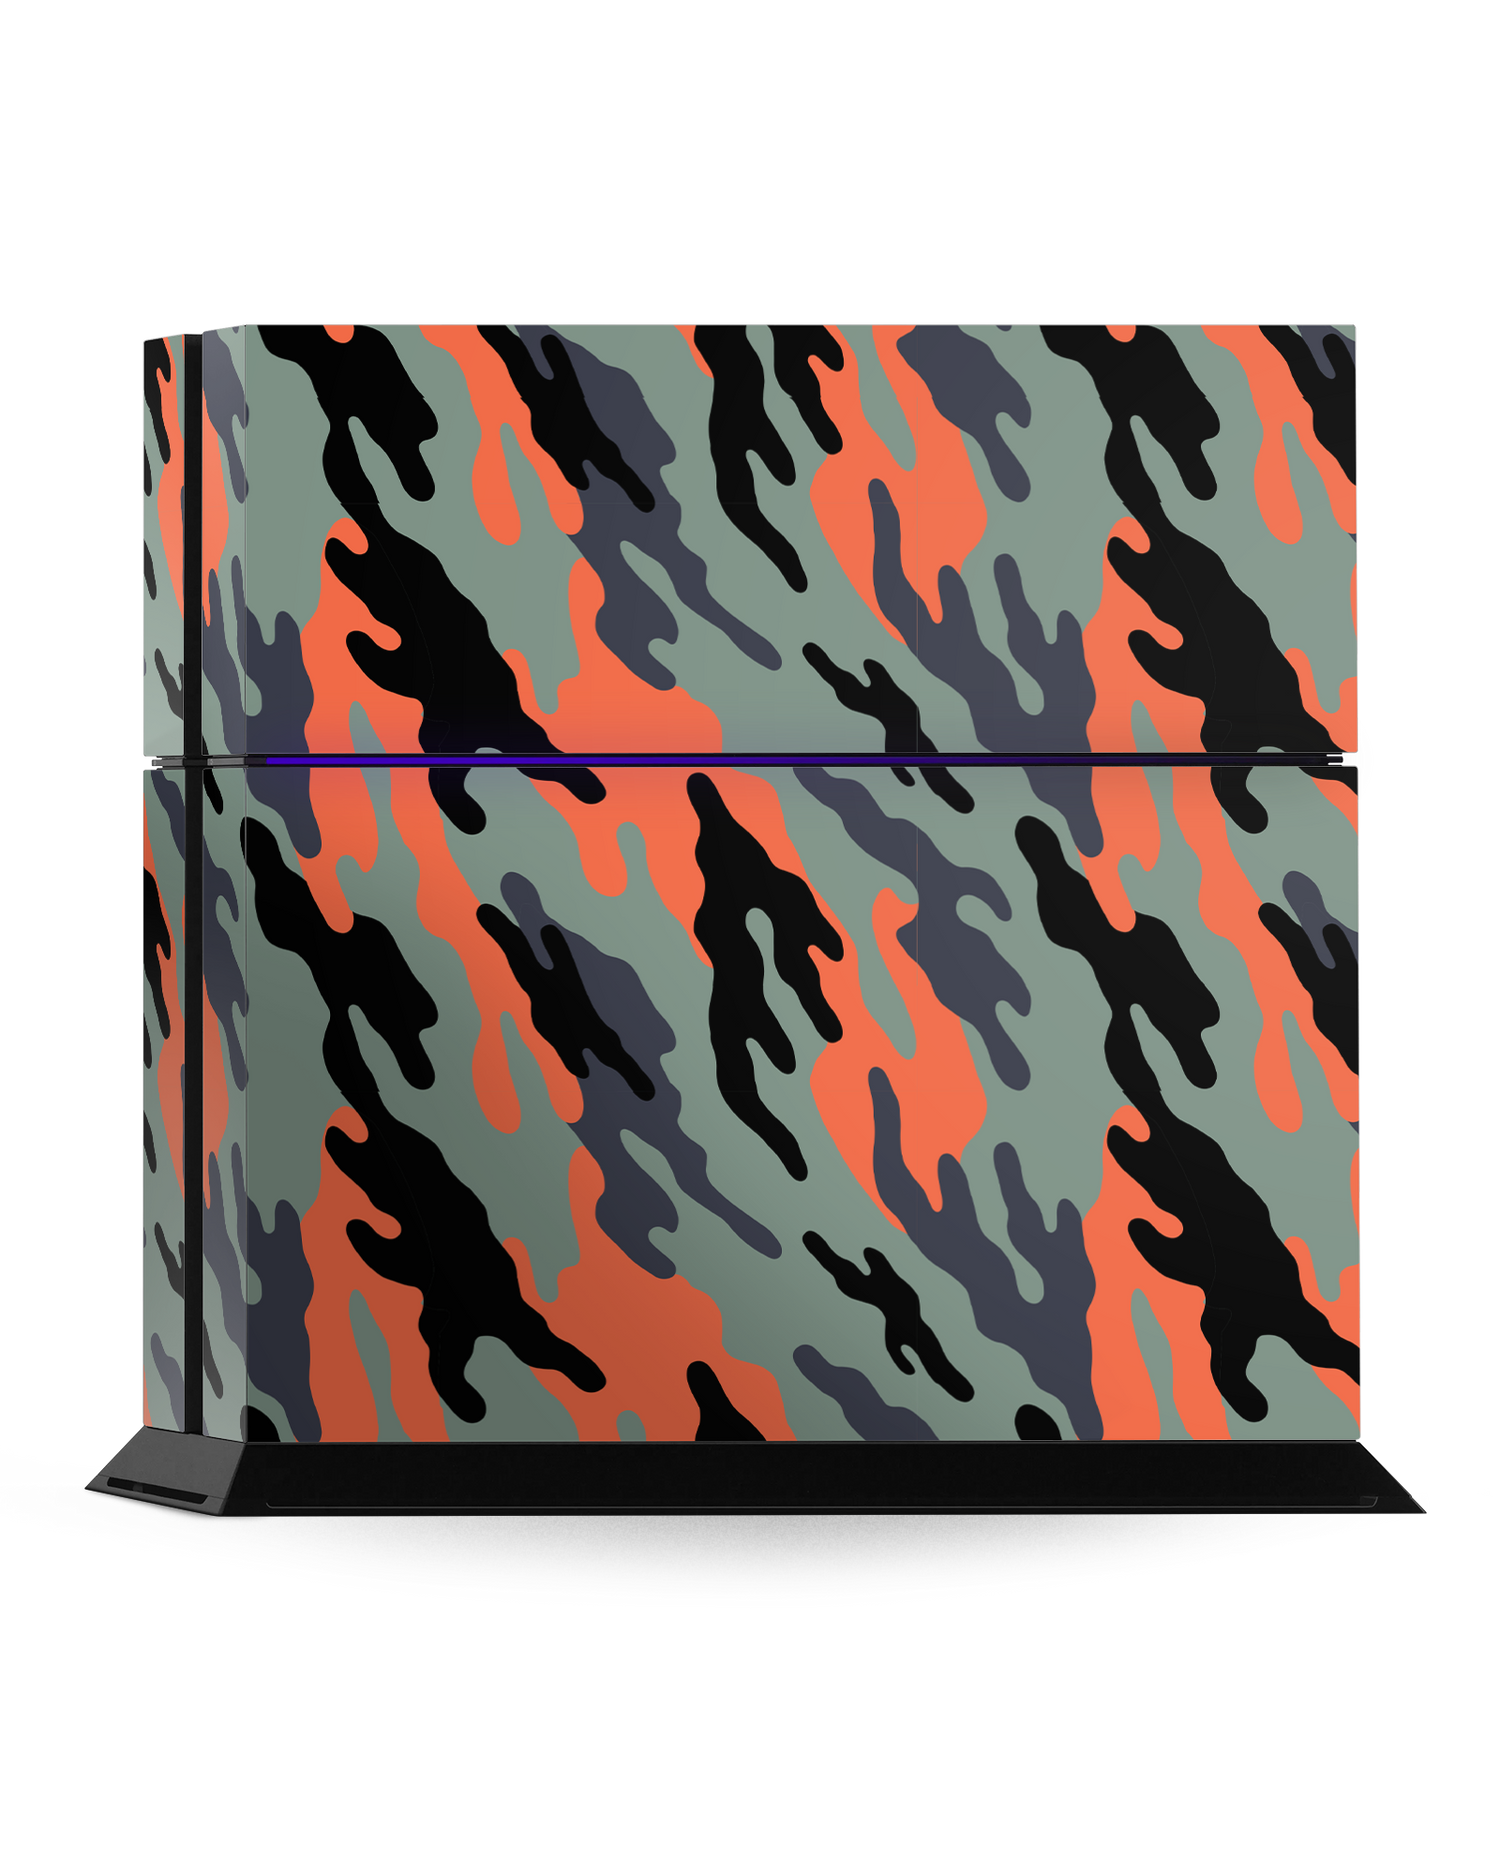 Camo Sunset Console Skin for Sony PlayStation 4: Standing